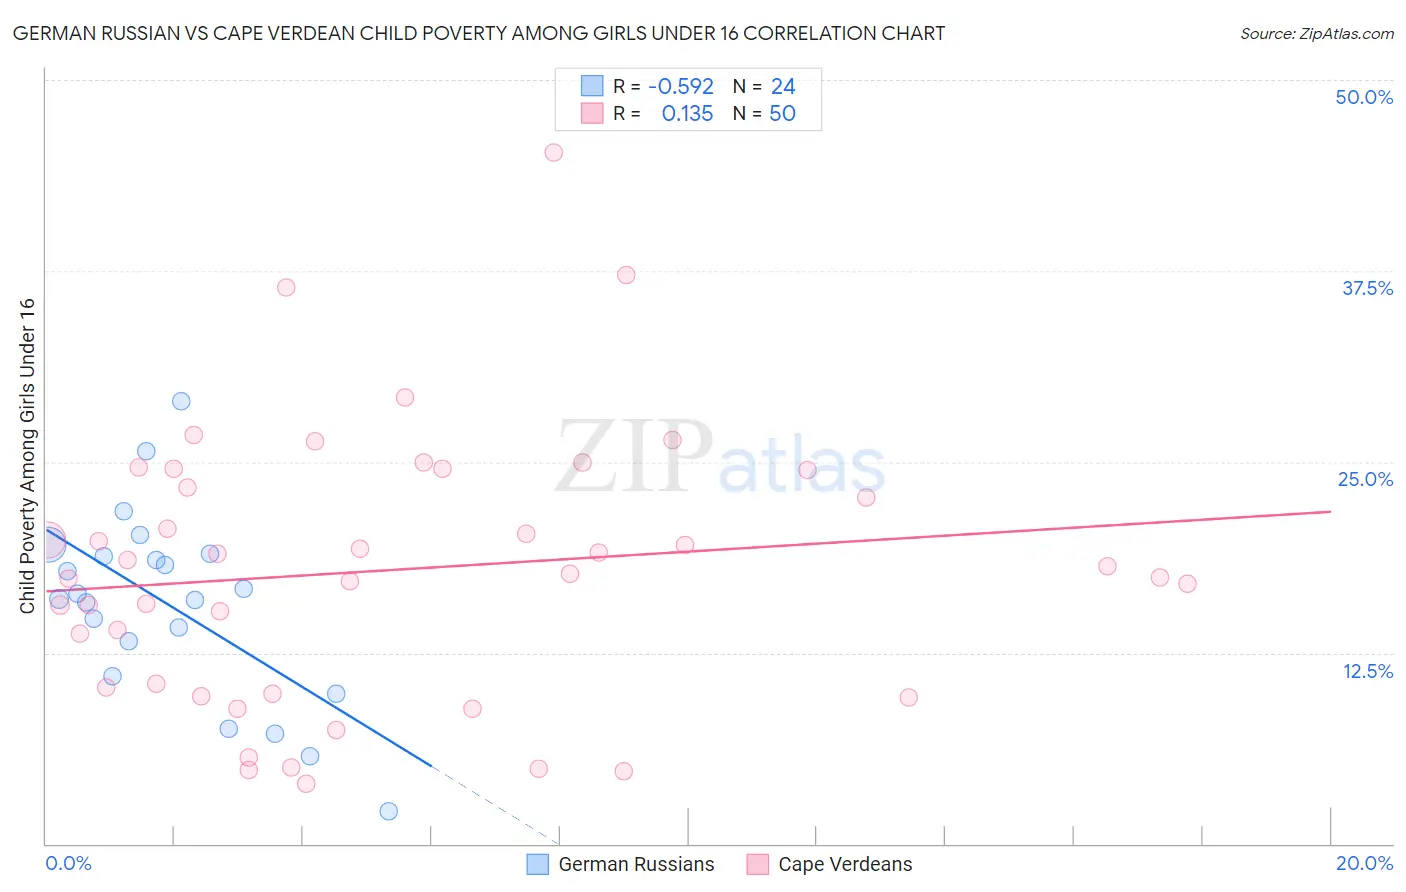 German Russian vs Cape Verdean Child Poverty Among Girls Under 16